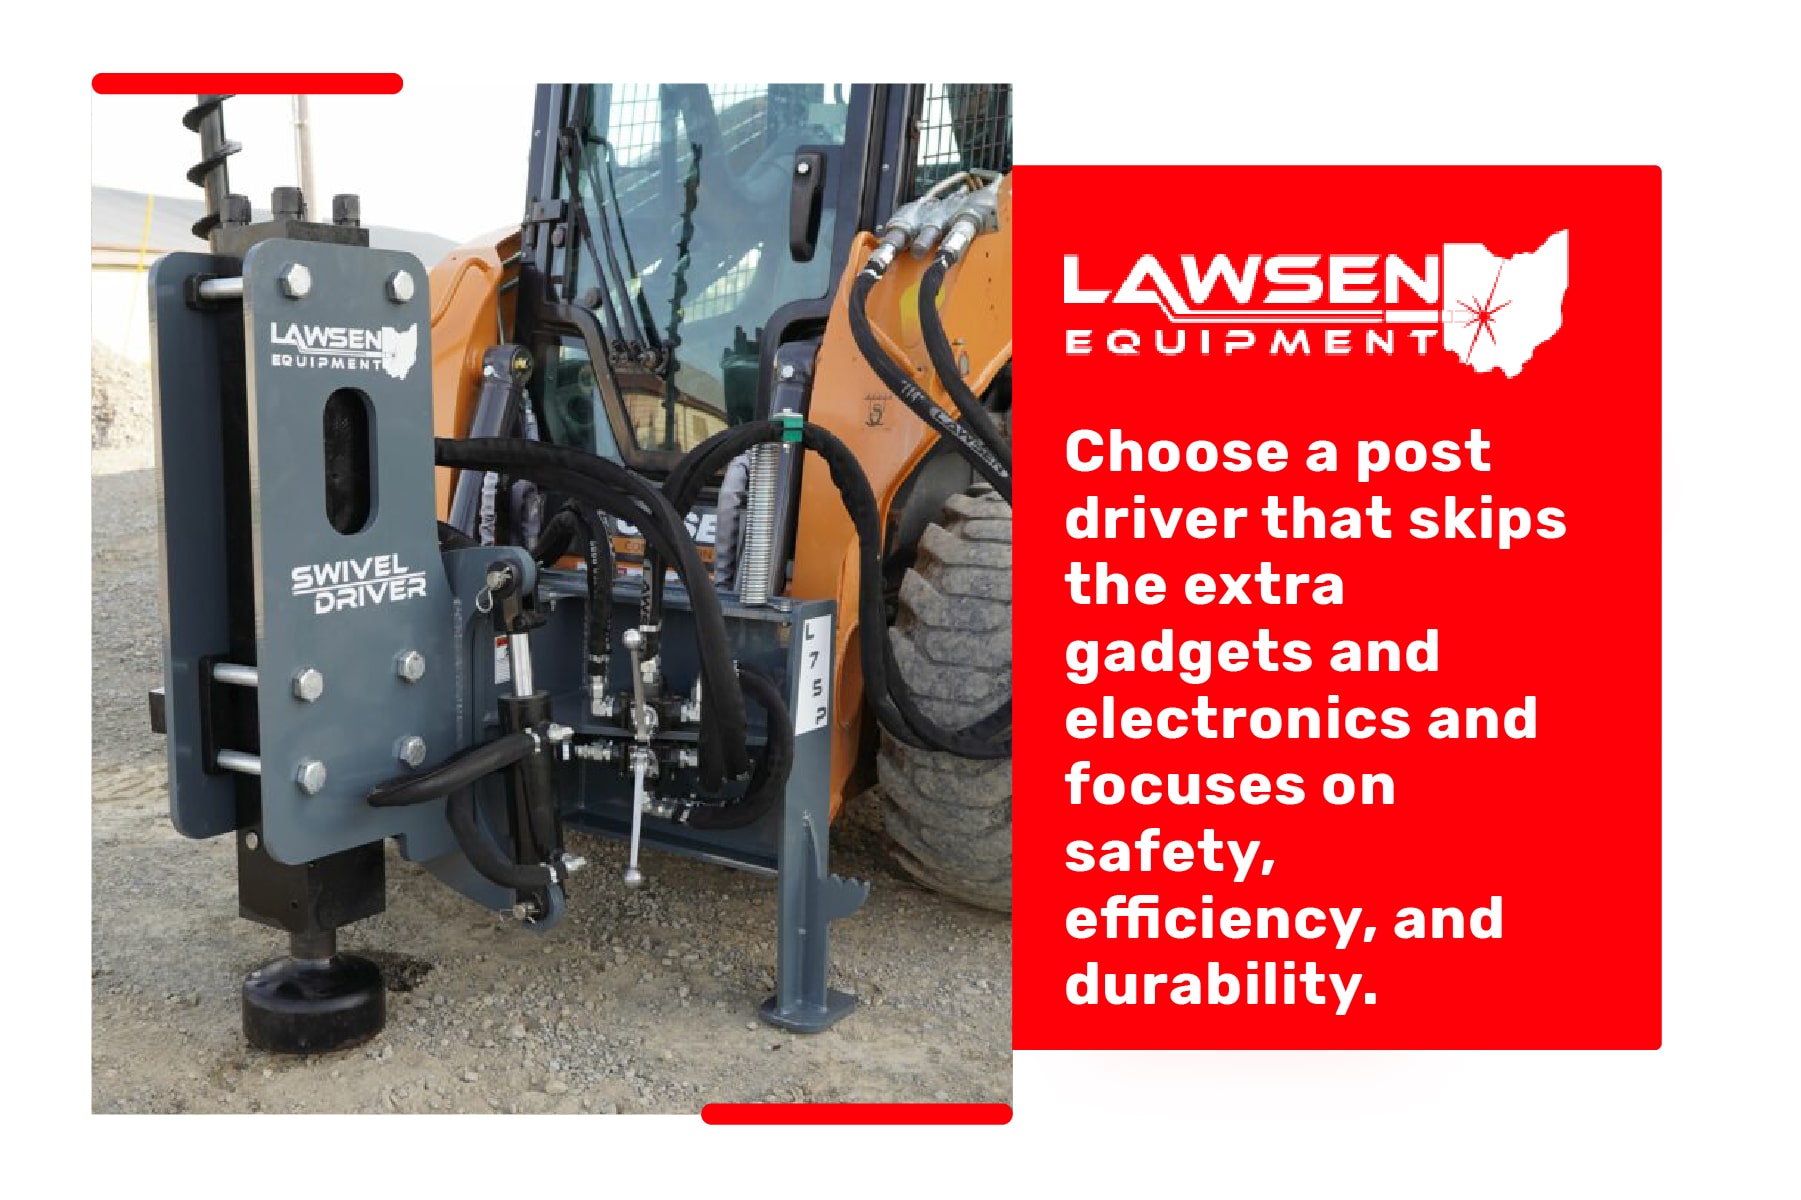 Choose a post driver that skips gadgets and focuses on safety